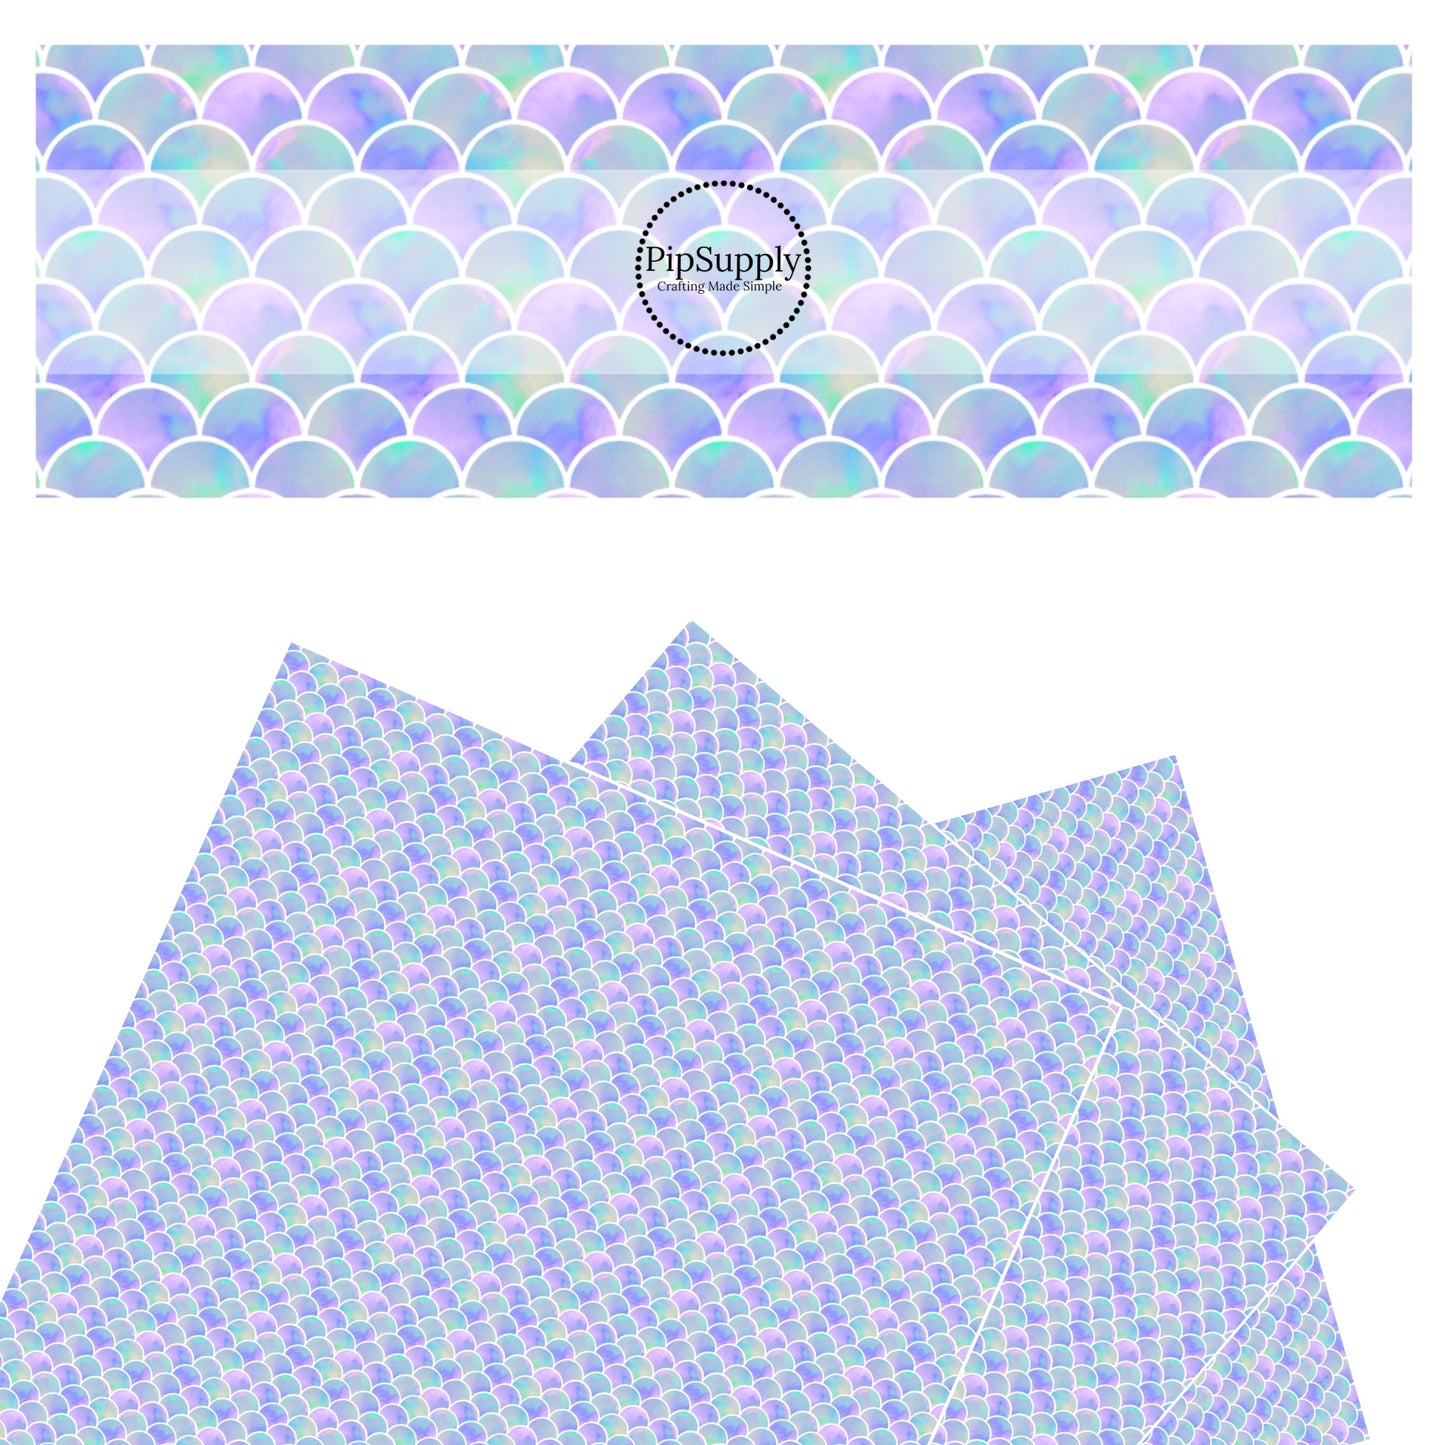 Mermaid scale inspired pastel faux leather sheet.